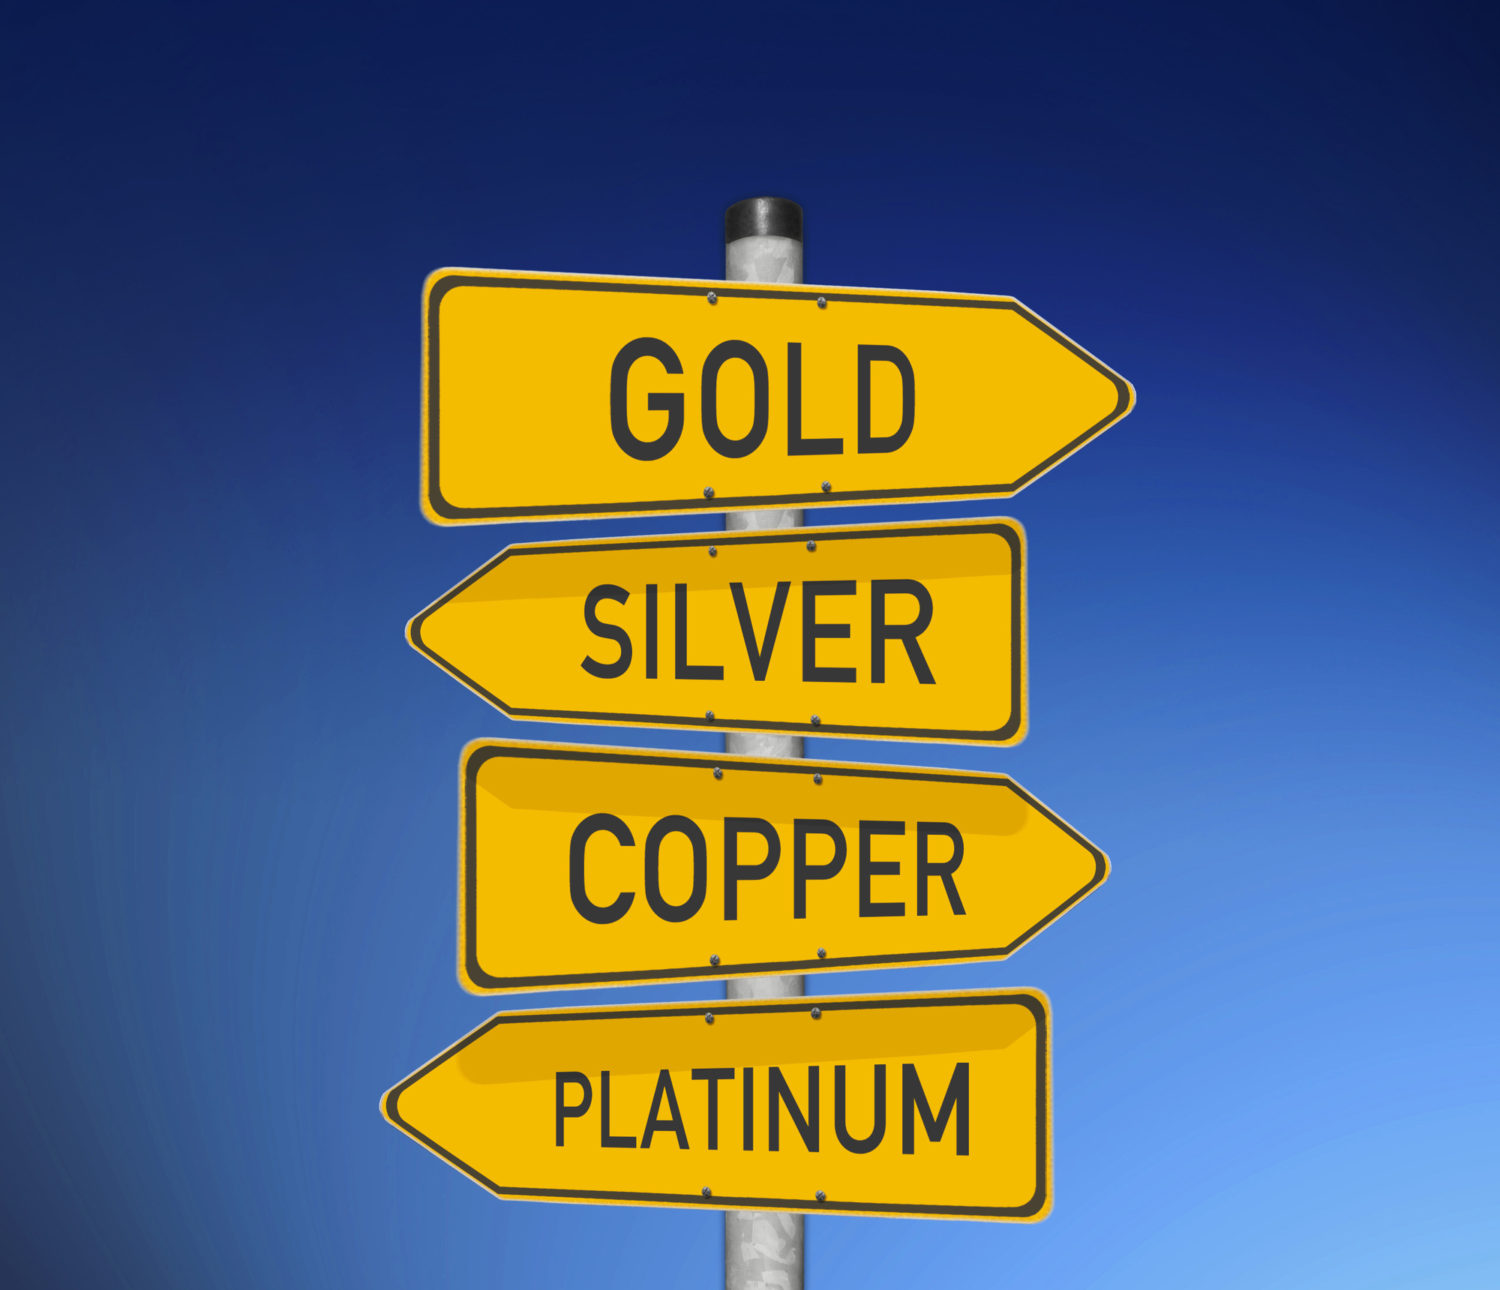 3 Crucial Things to Know Before Investing in Precious Metals